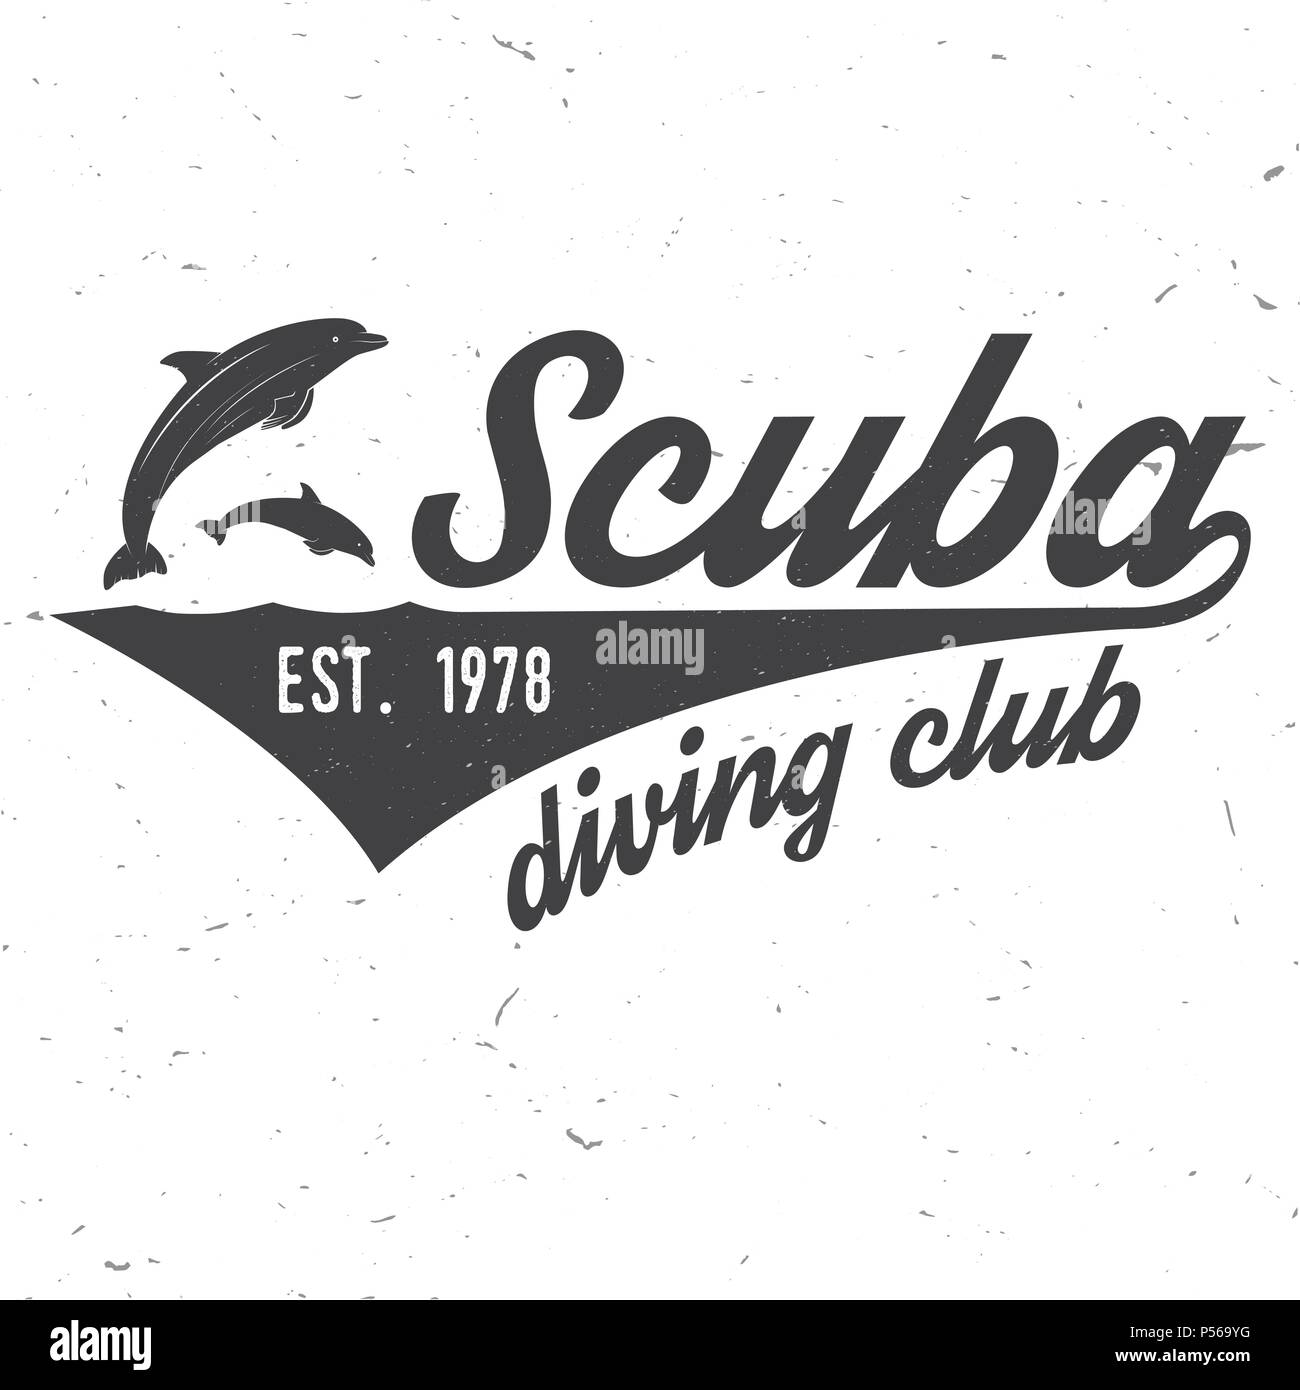 Scuba diving club. Vector illustration. Concept for shirt or logo, print, stamp or tee. Vintage typography design with dolphin silhouette. Stock Vector